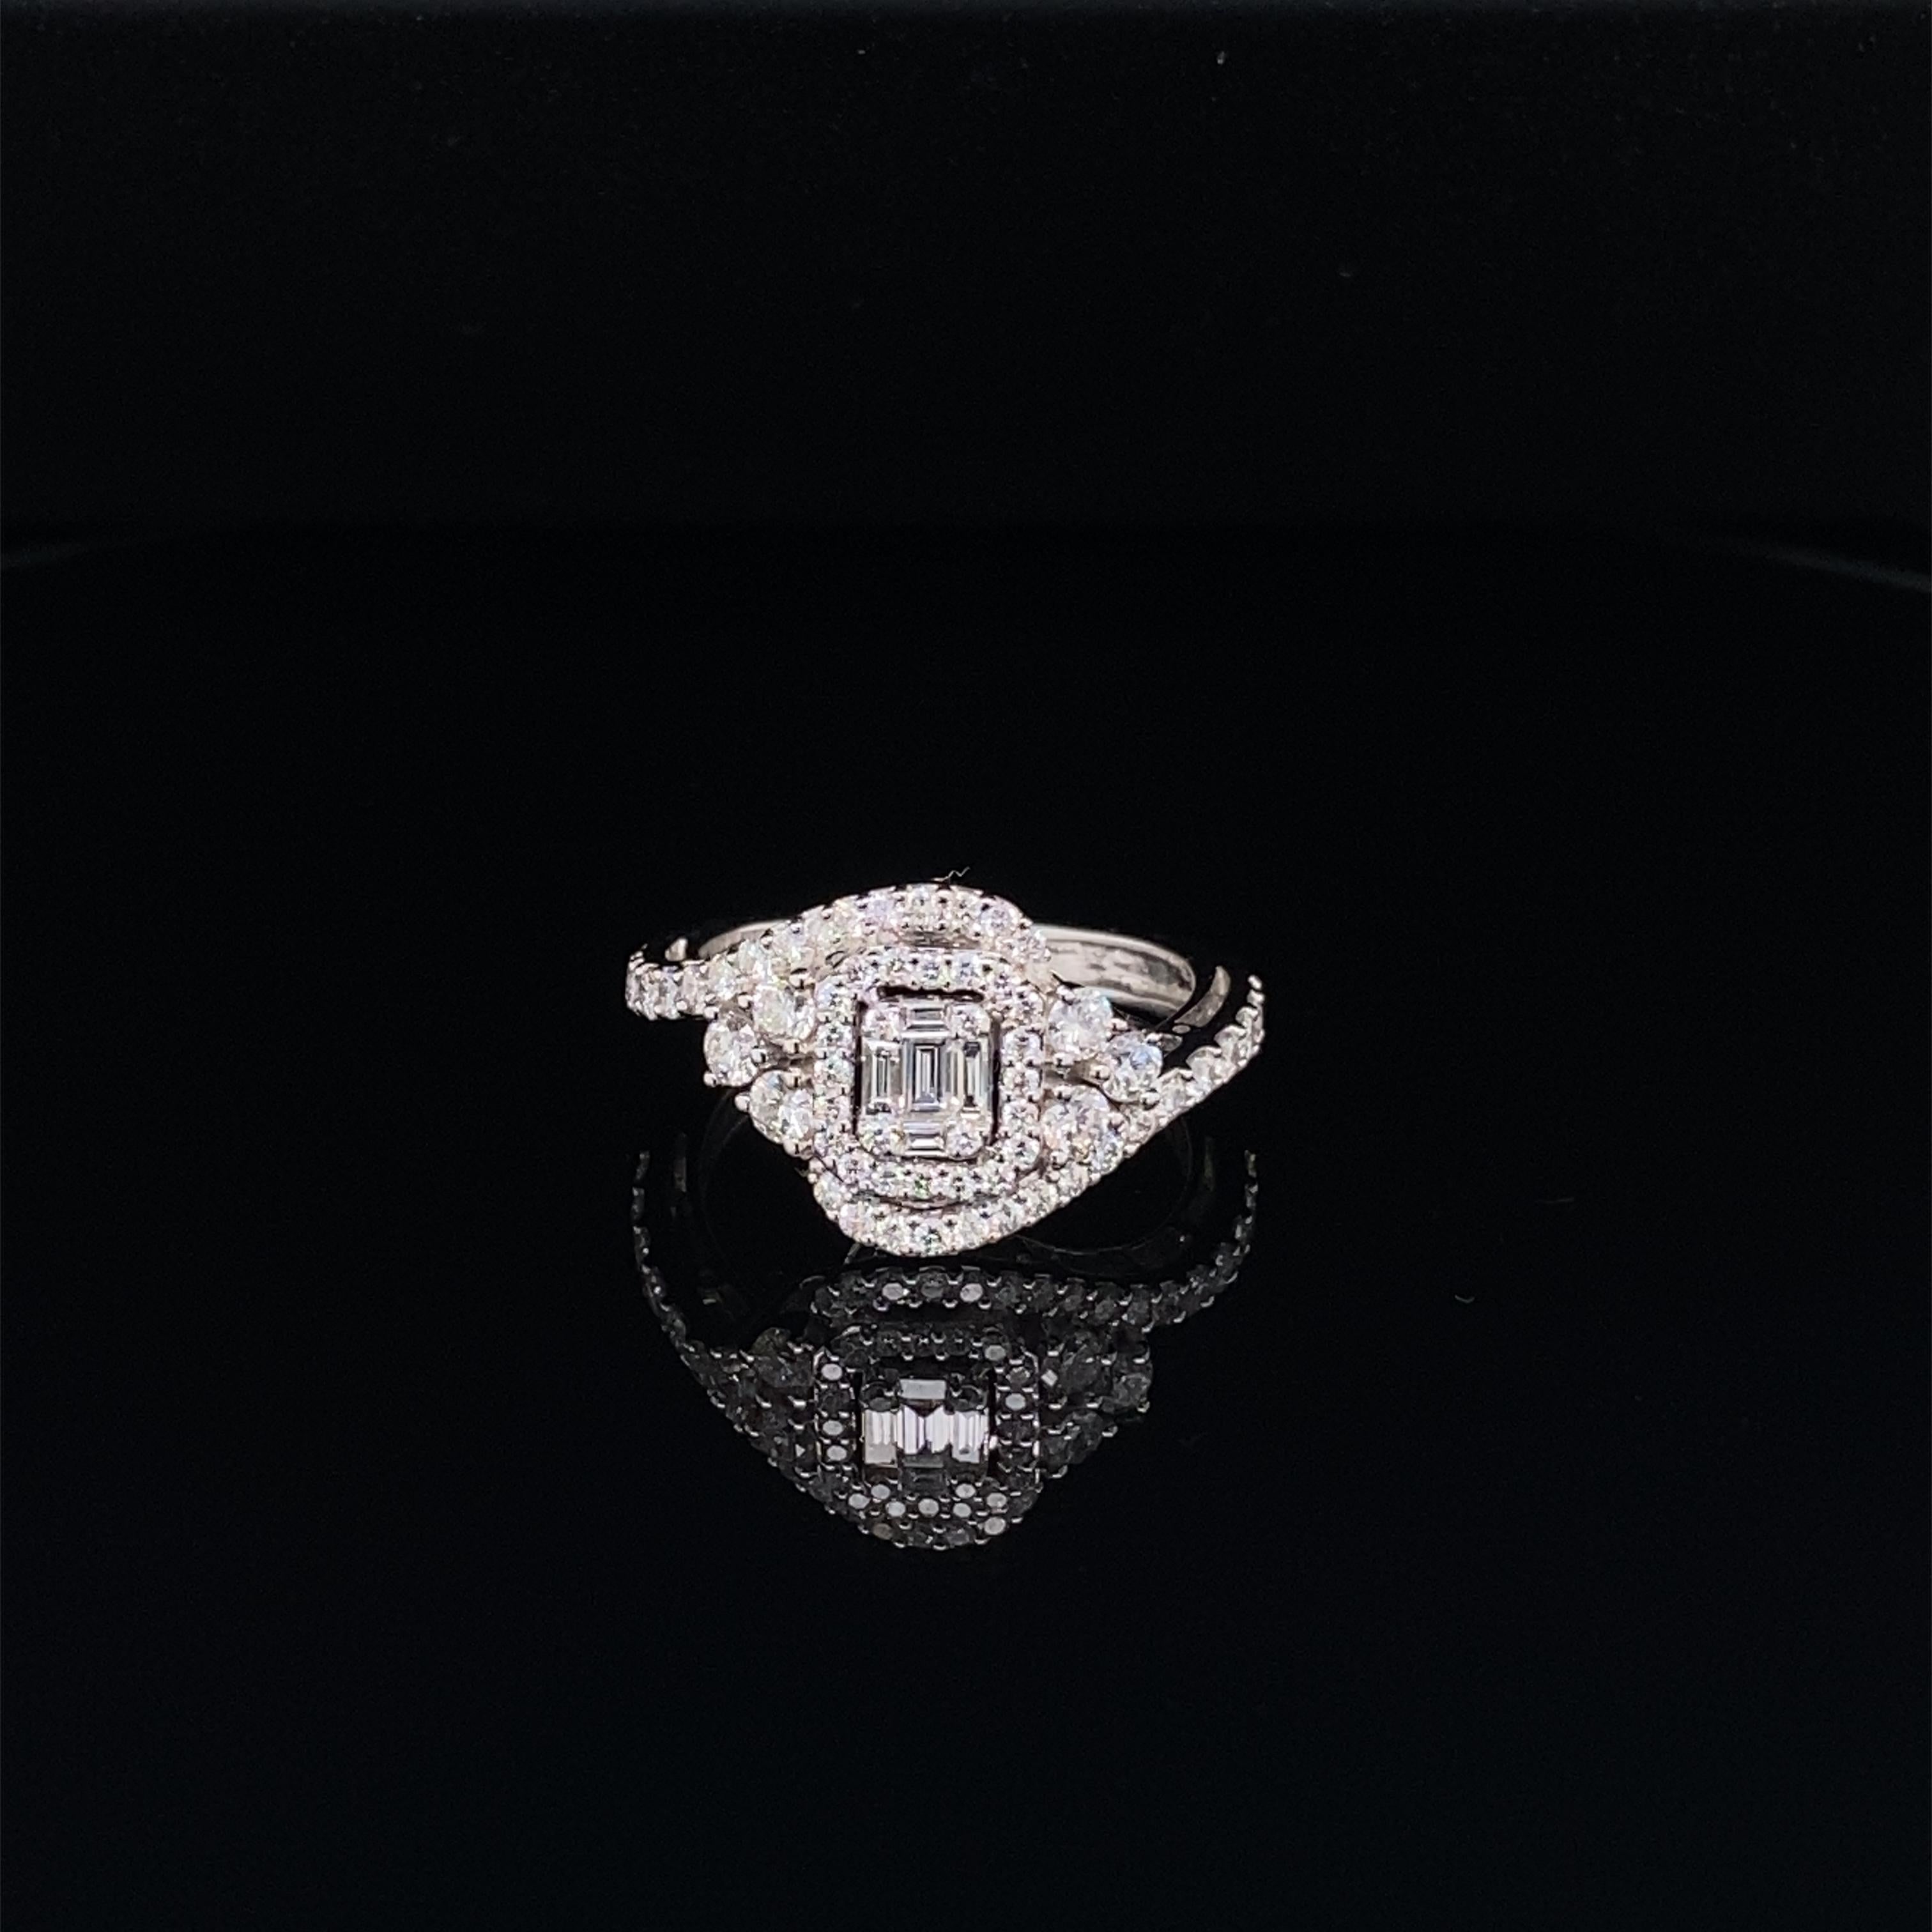 This stunning ring features a beautiful Emerald Cut Cluster of White Diamonds comprising of Baguette and Round Diamonds, surrounded by a sea of Diamonds. The Diamond Cluster sits on a Diamond Shank. This ring is set in 18K White Gold.
Total Diamond